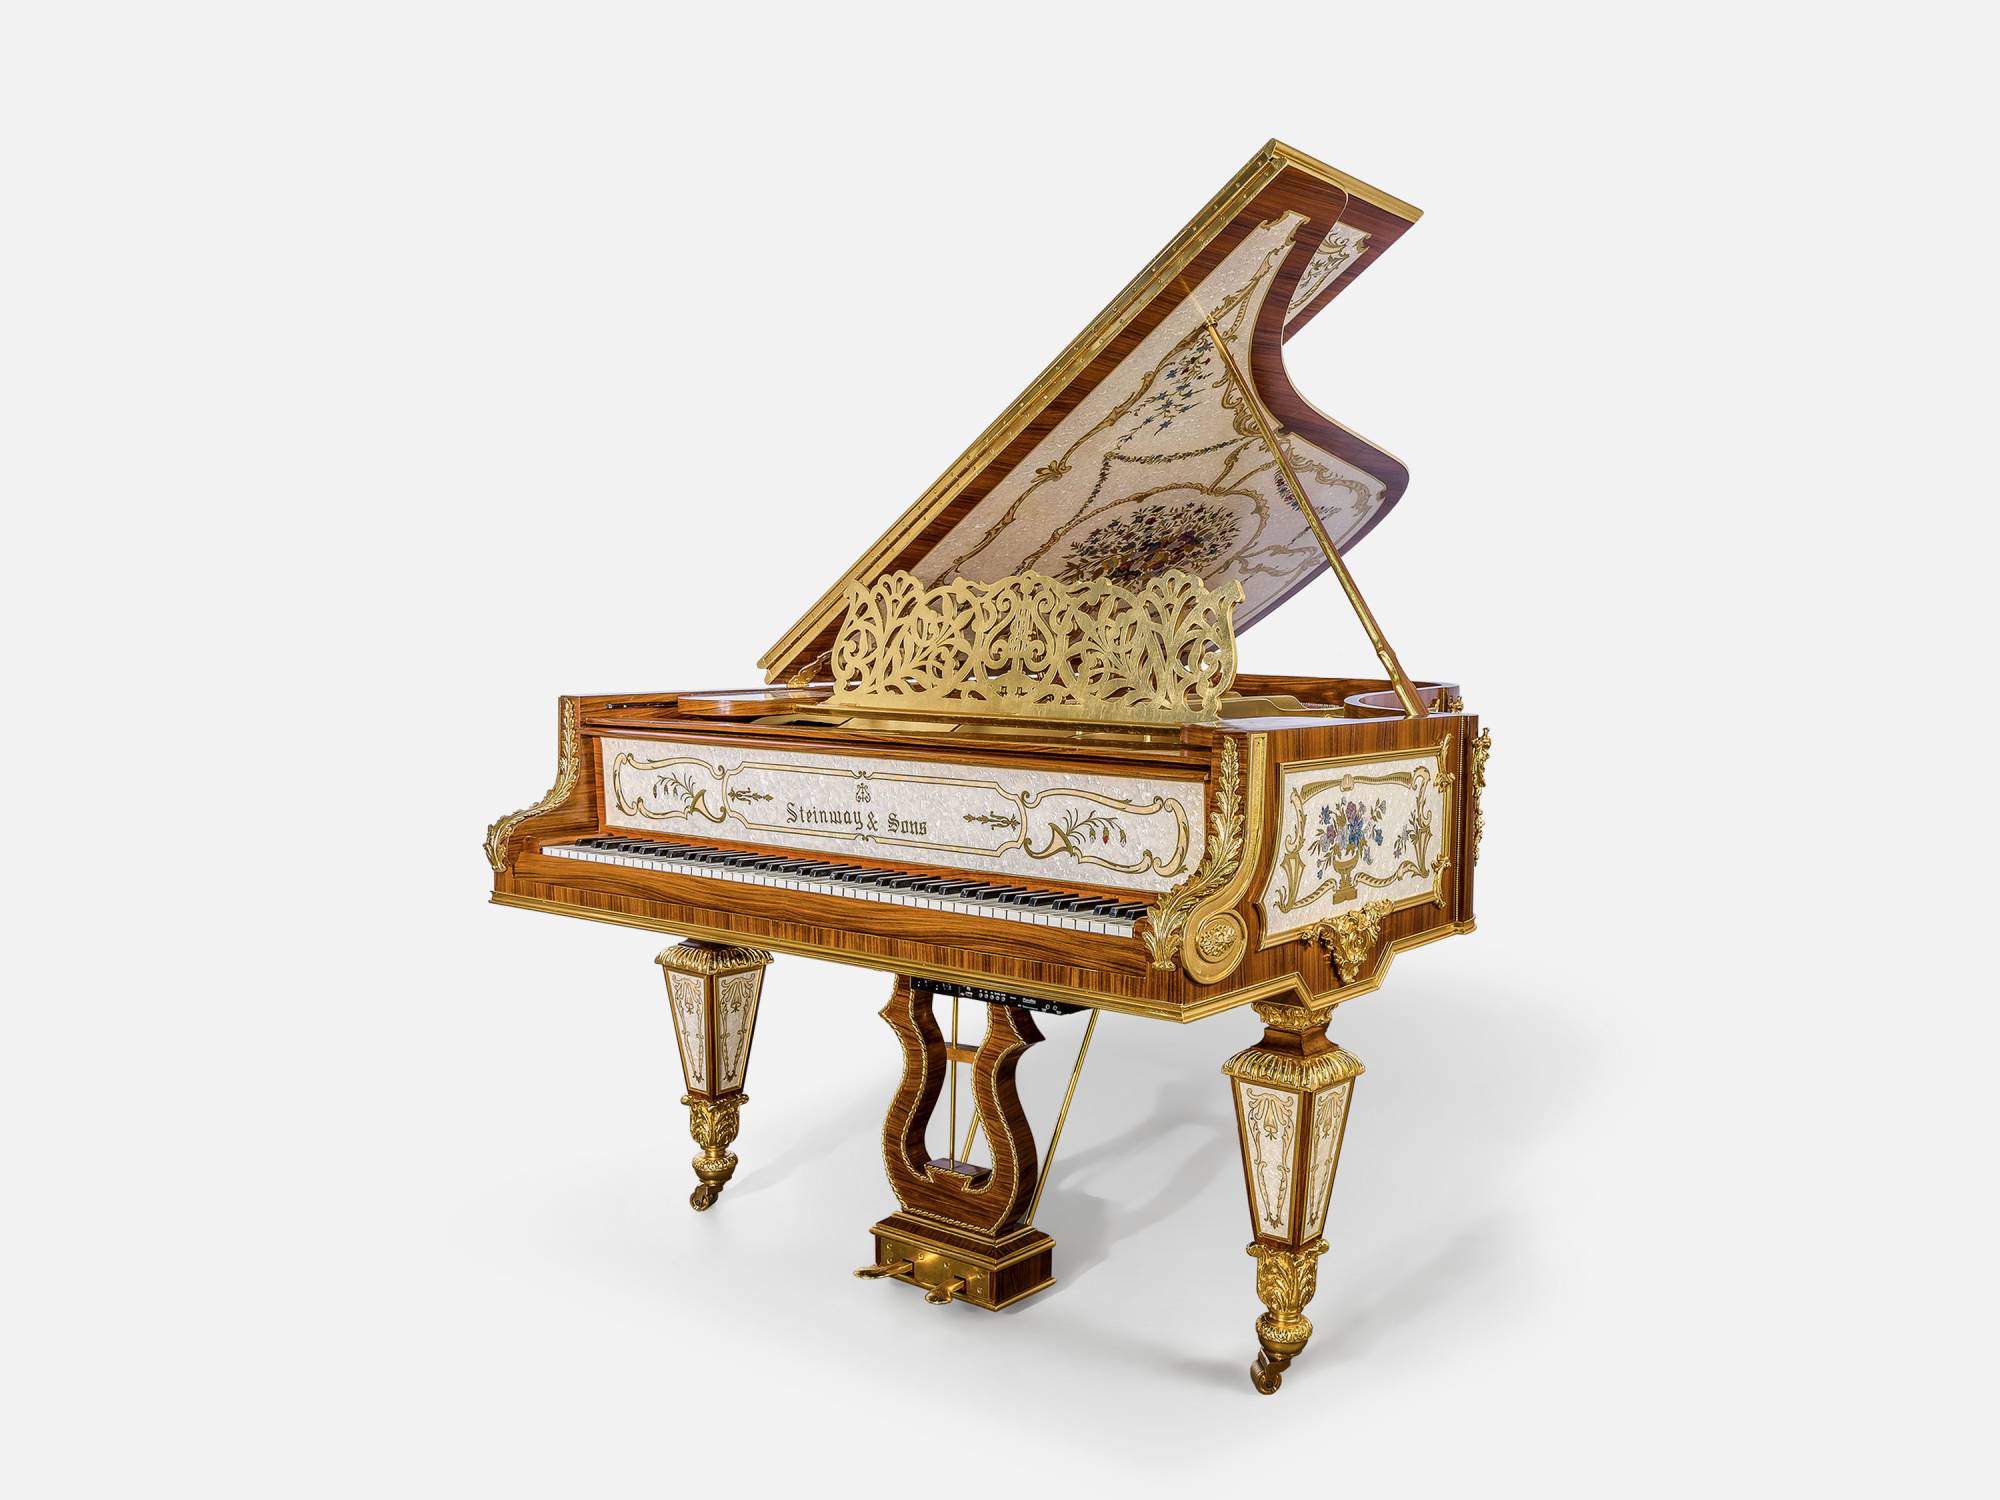 ART. 2707 – Discover the elegance of luxury classic Pianos made in Italy by C.G. Capelletti. Luxury classic furniture that combines style and craftsmanship.